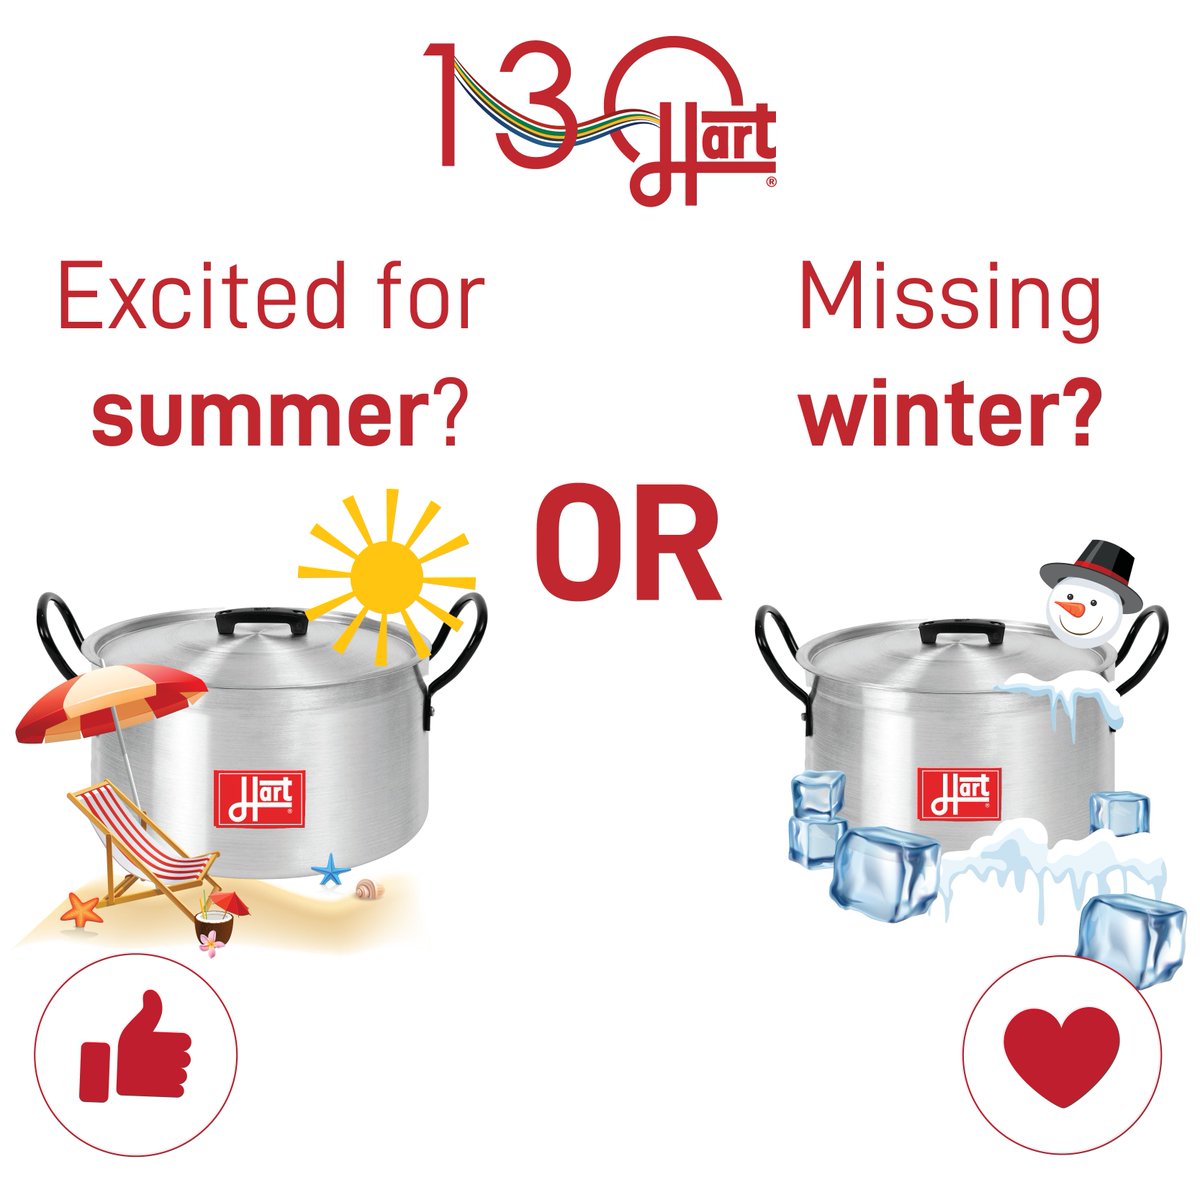 HAPPY SPRING DAY! Are you missing the cold or excited for summer?💐🌷🌼

React or comment with your choice.

#Hart #HartHomeware #HaveFunCooking #Cooking #Recipe #Hart130thBirthday #SpringRecipes #SummerBody #HealthySnacks #SpringDay #Spring #SouthAfricanCookware